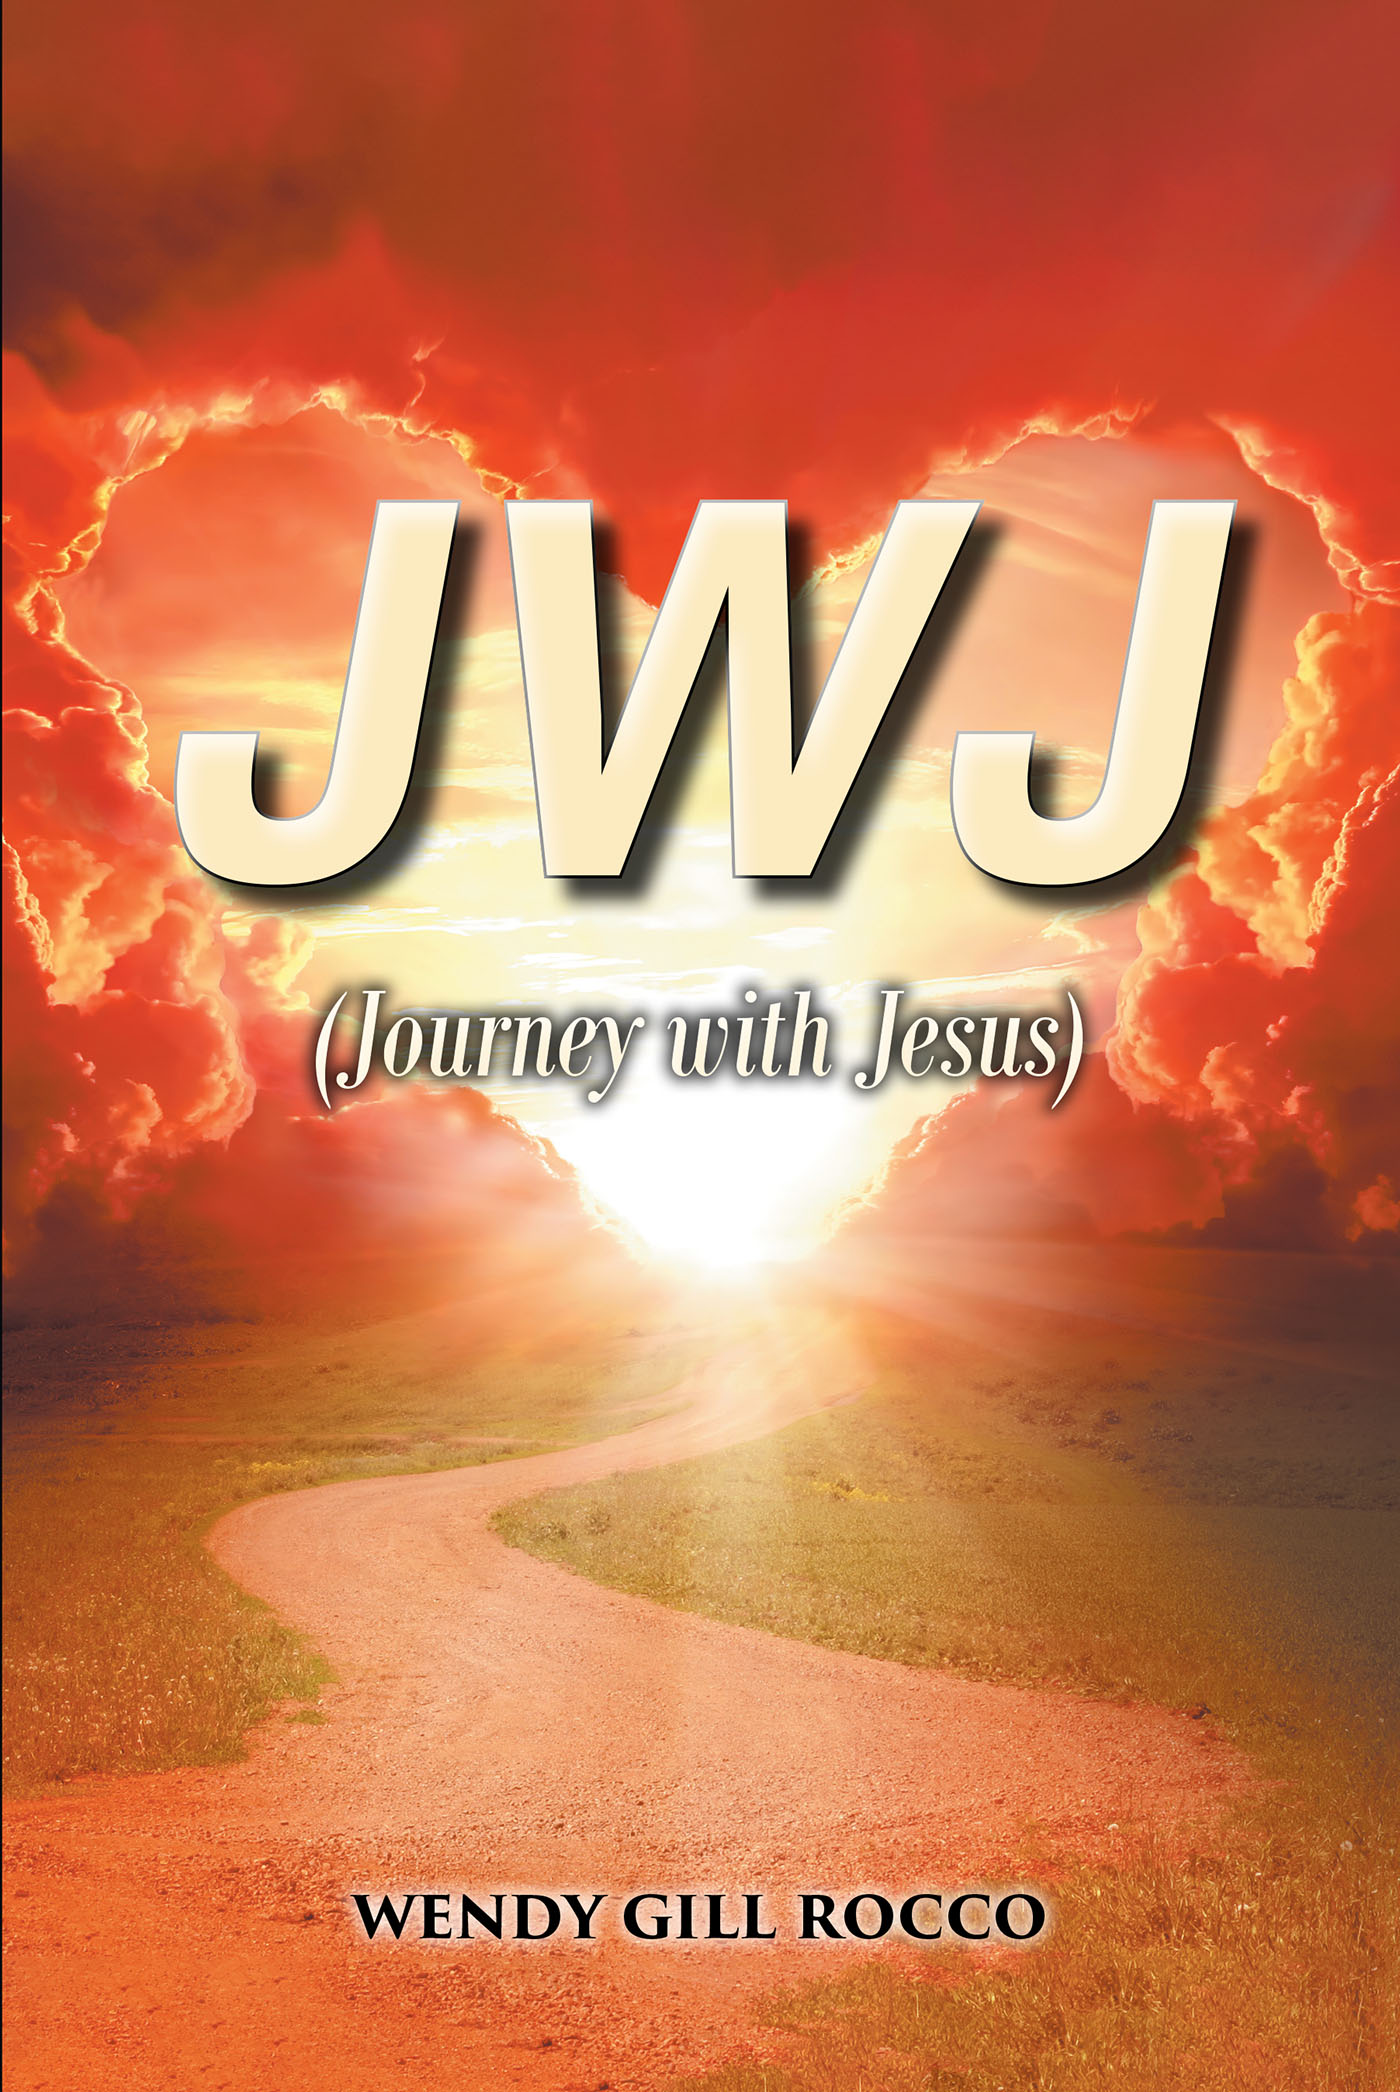 Wendy Gill Rocco’s Newly Released "JWJ (Journey with Jesus)" is a Testament to the Unexpected Blessings God Grants Along the Way